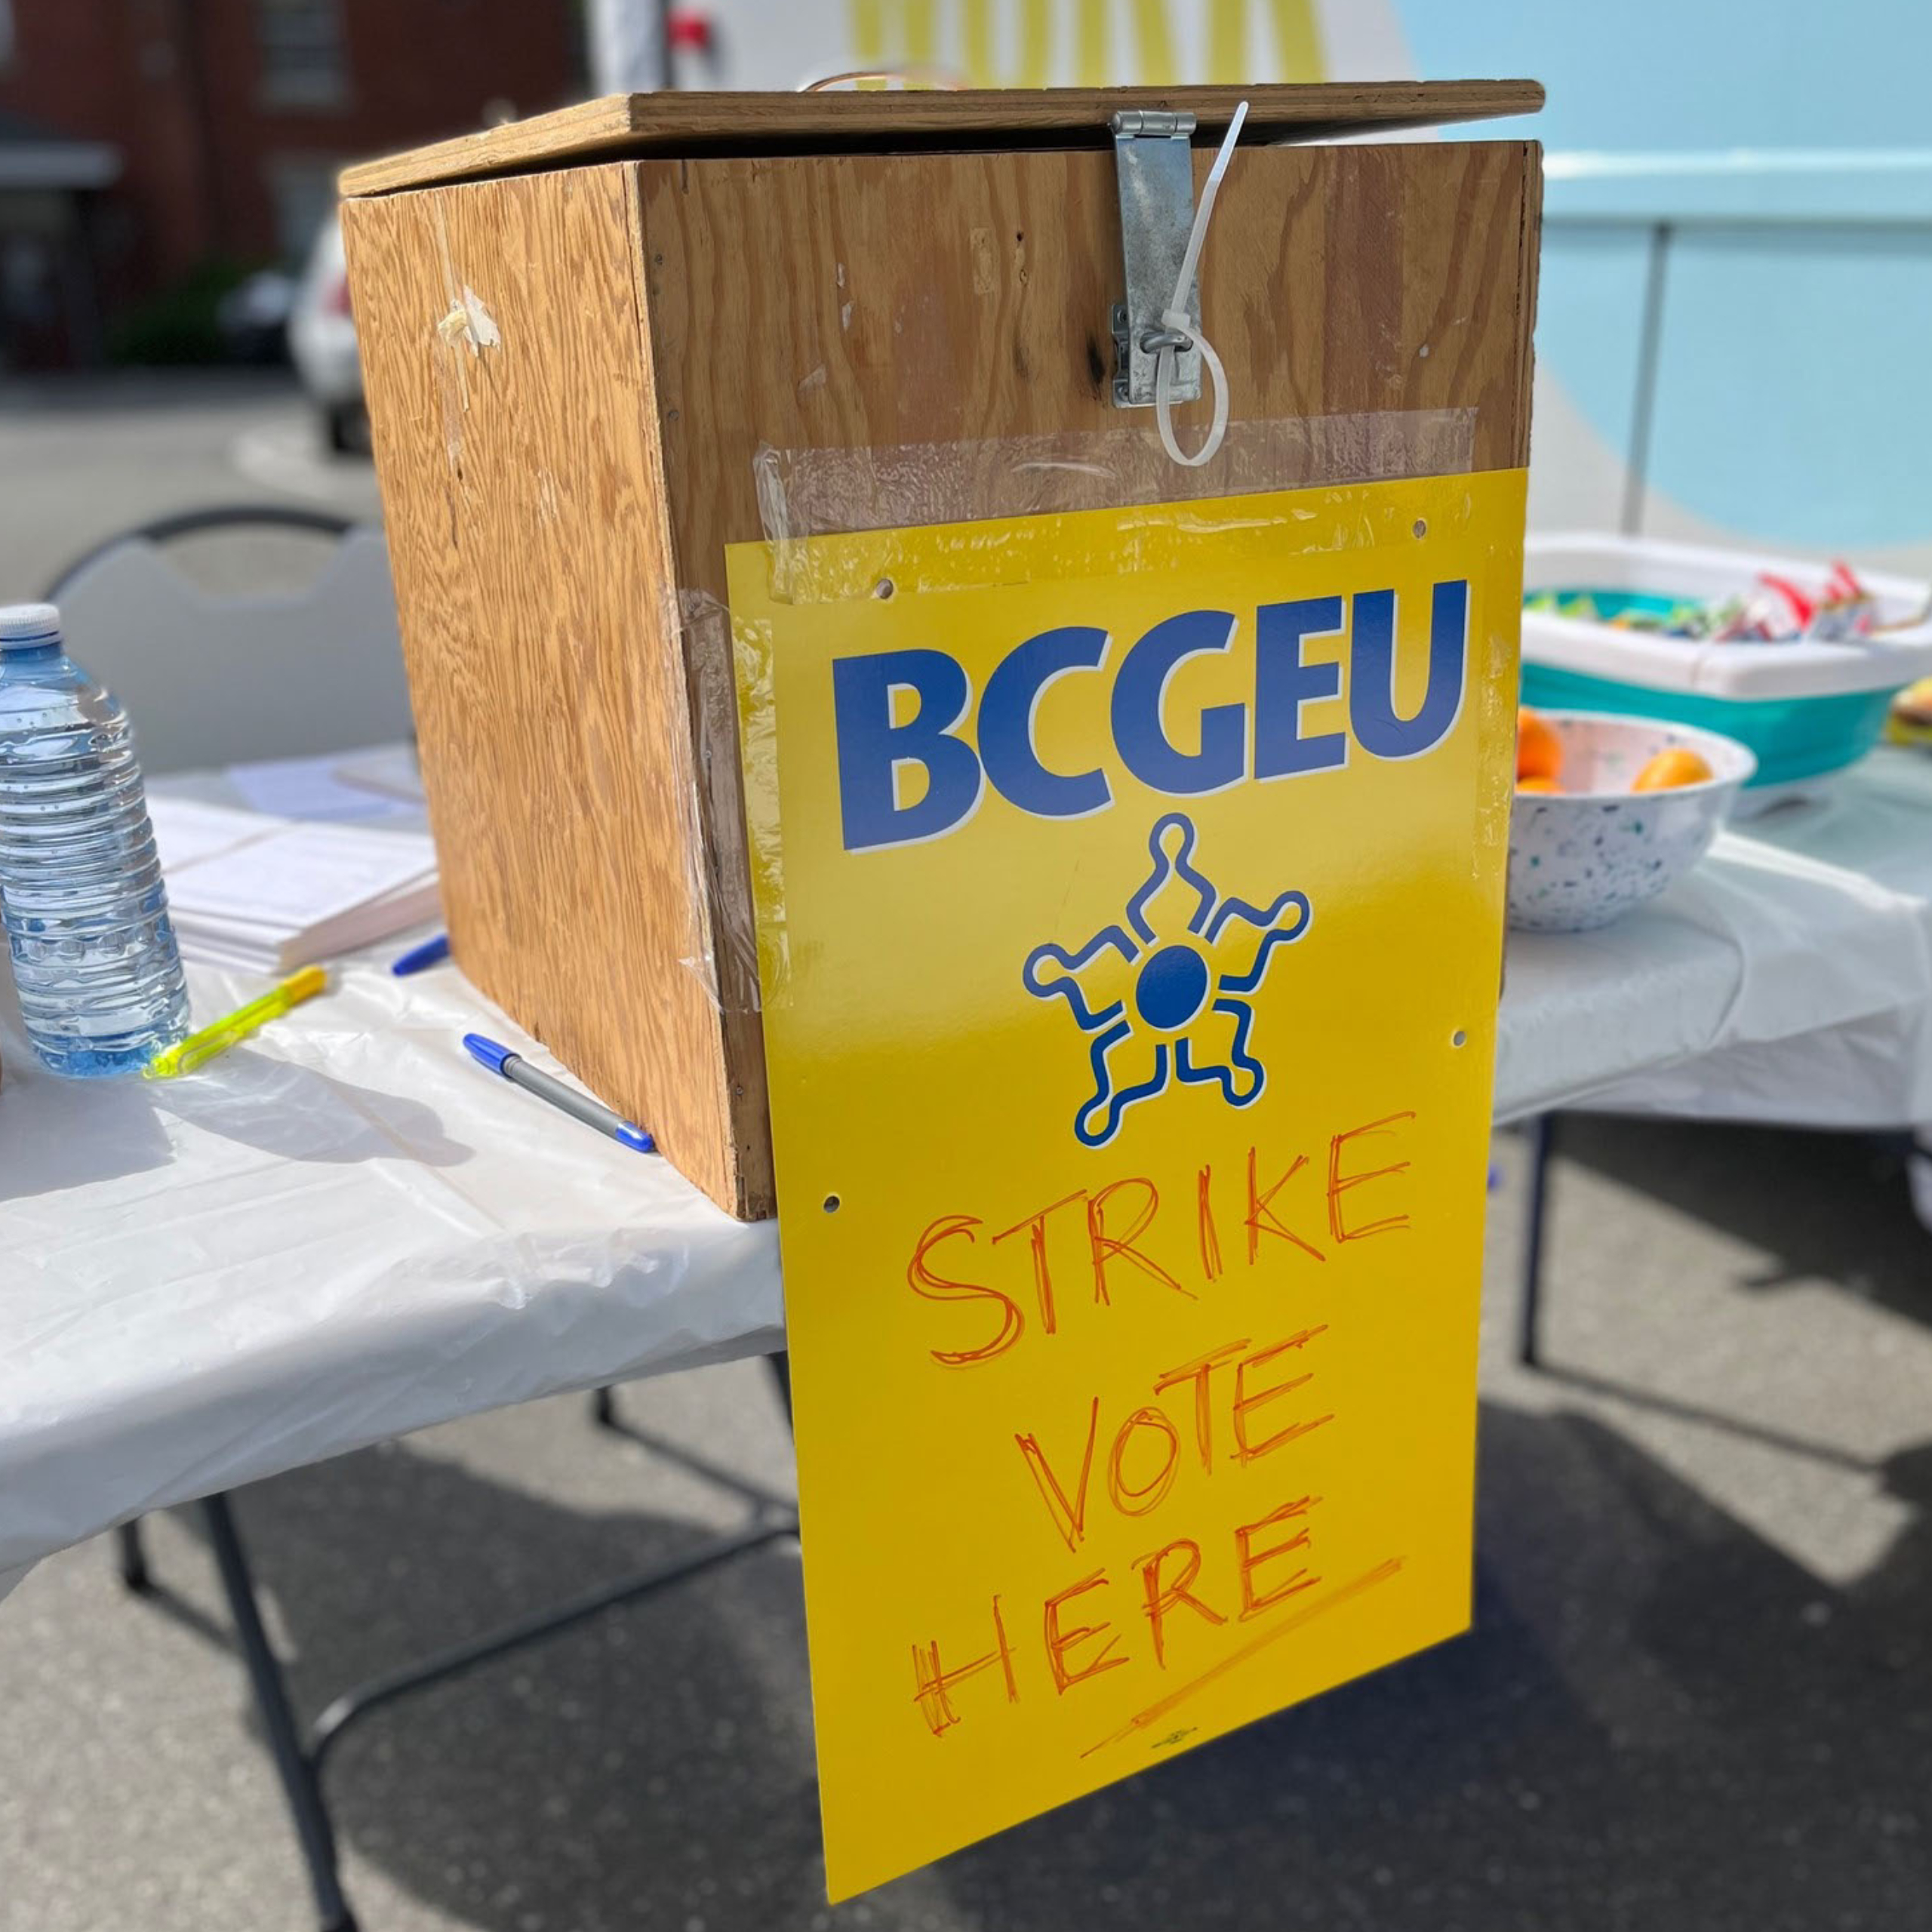 BC public sector workers closer to strike action